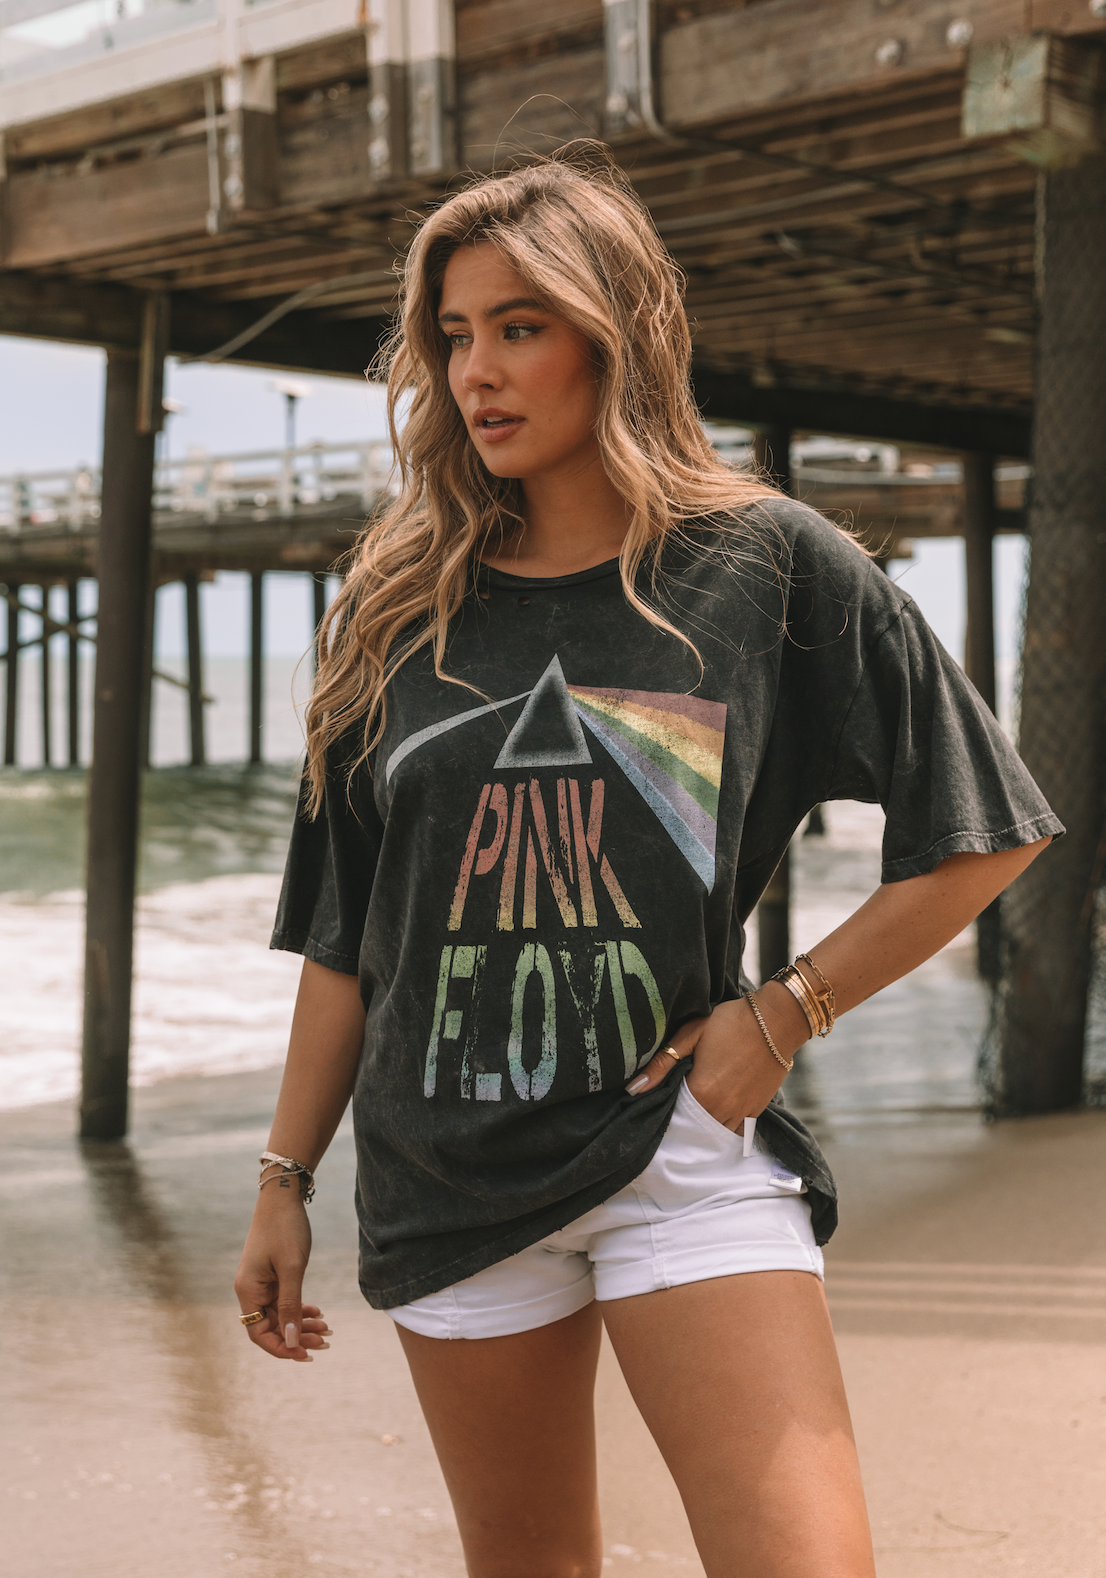 The Pink Floyd Graphic Tee